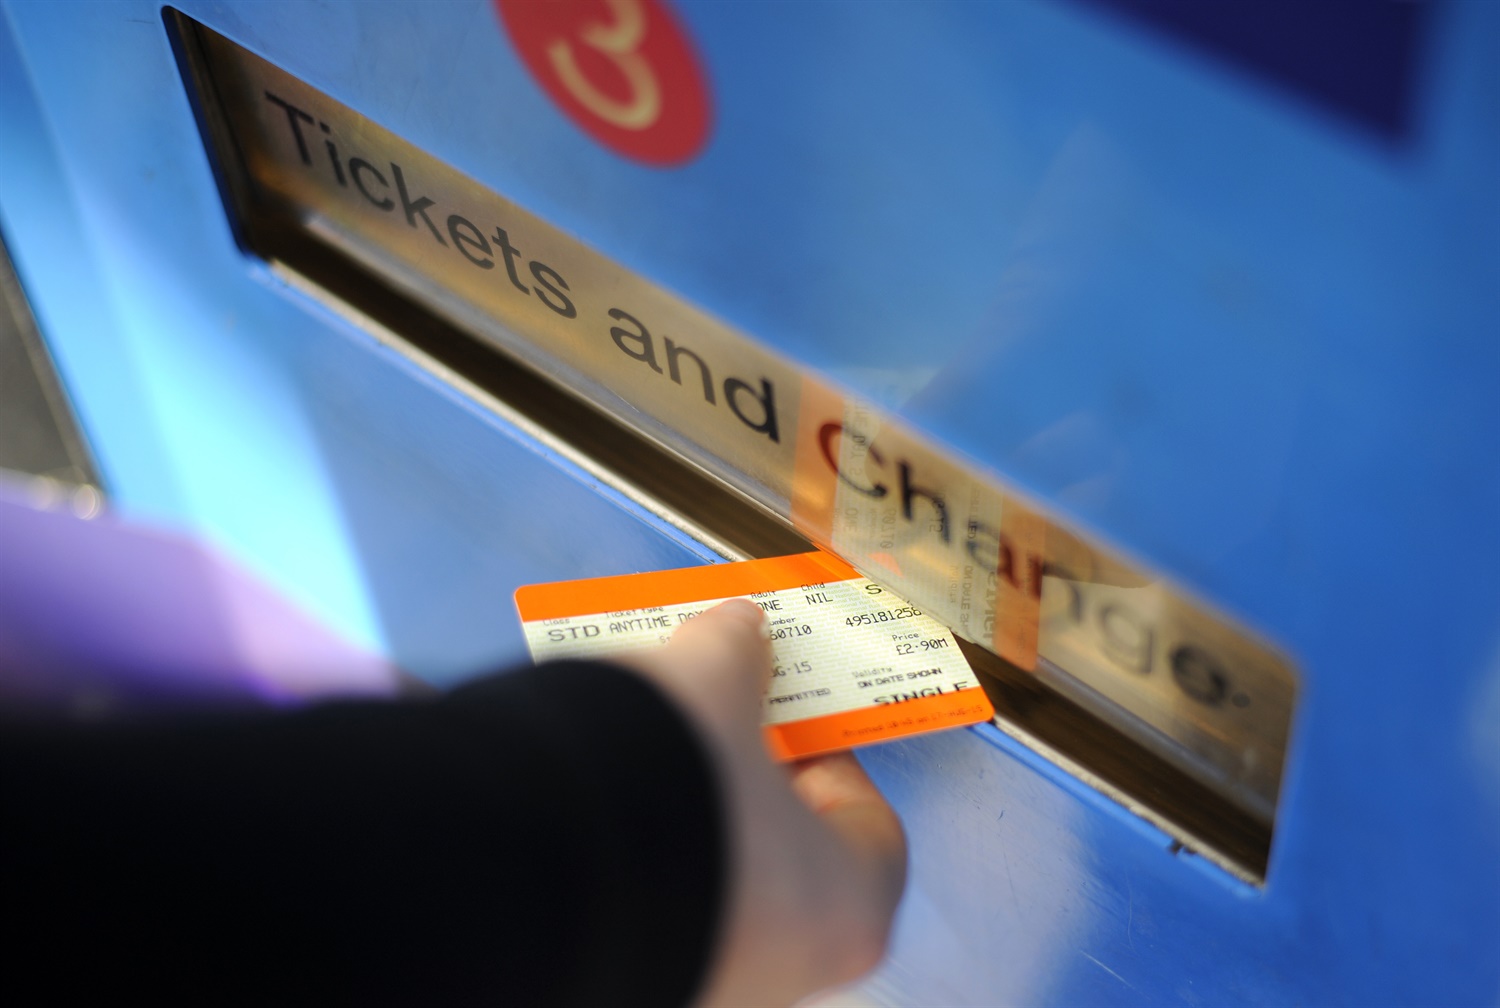 Train fares set to rise by average of 2.3% next year